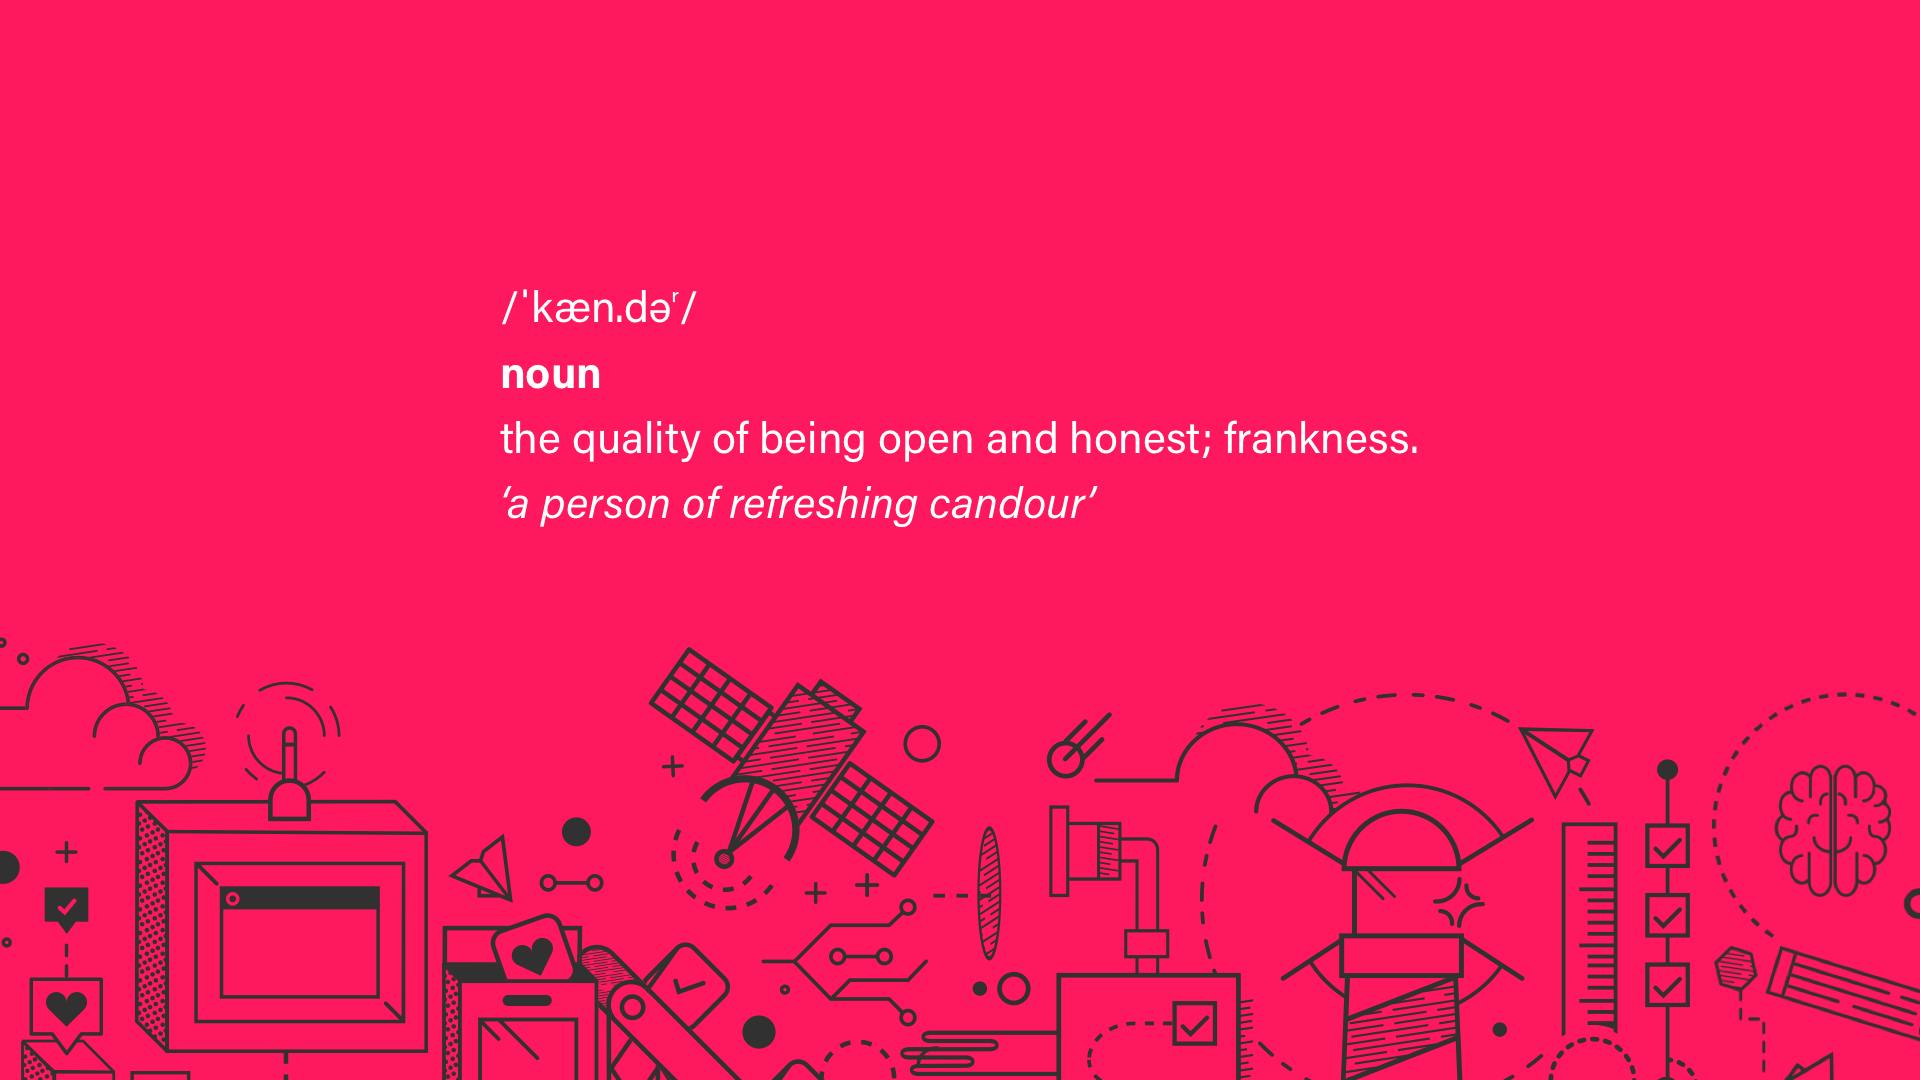 candour definition – the quality of being open and honest; frankness